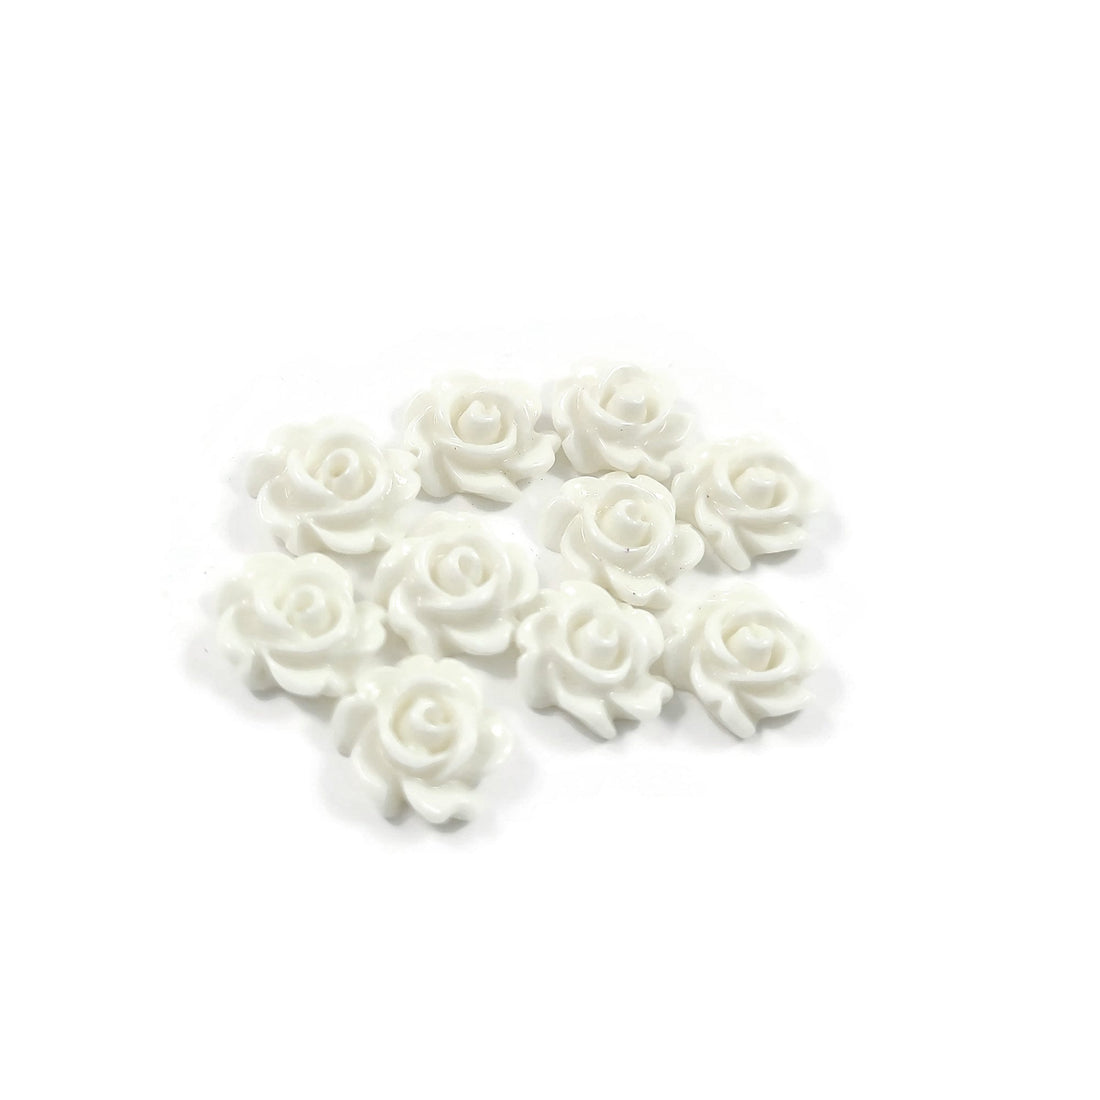 Dainty white flower cabochons, 7mm resin rose embellishments, Flatback earring cabochons, Jewelry making supplies